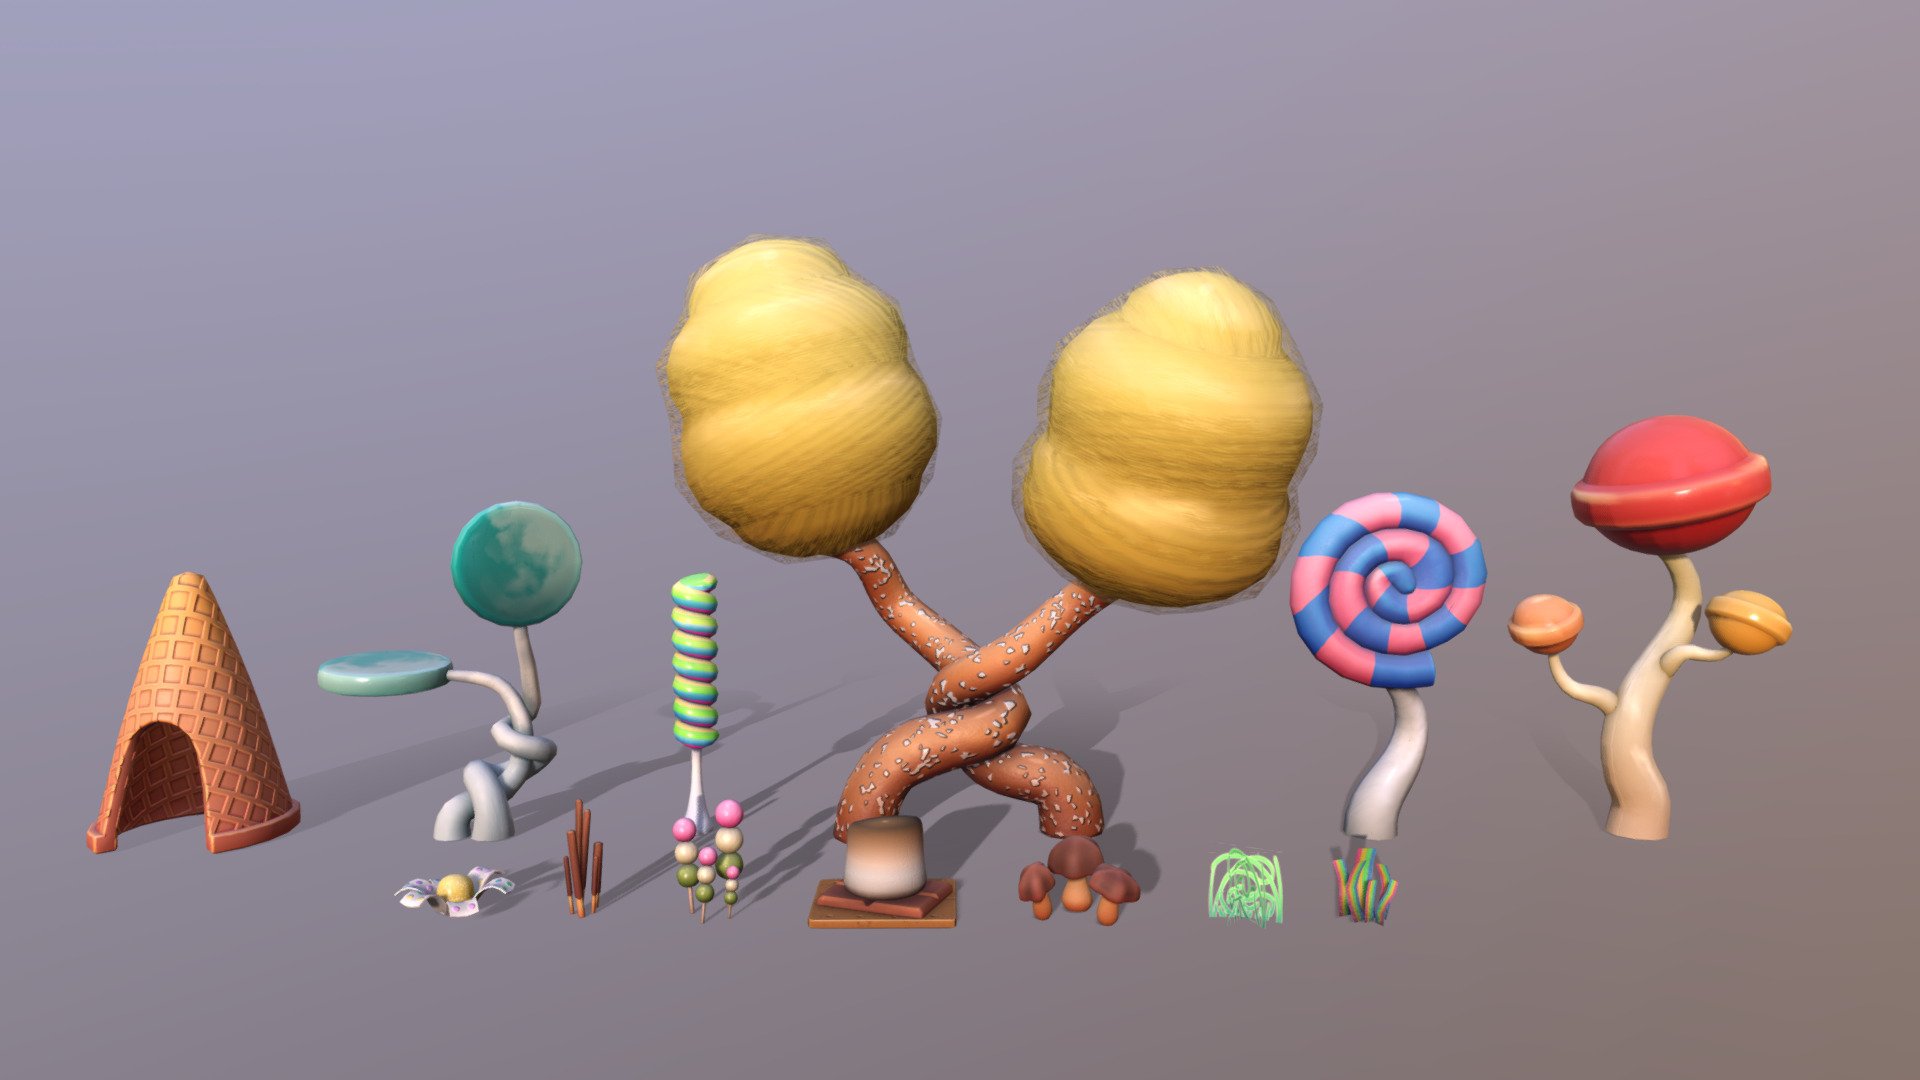 Some props I made for a landscape I made. I've noticed that in a lot of &ldquo;candy